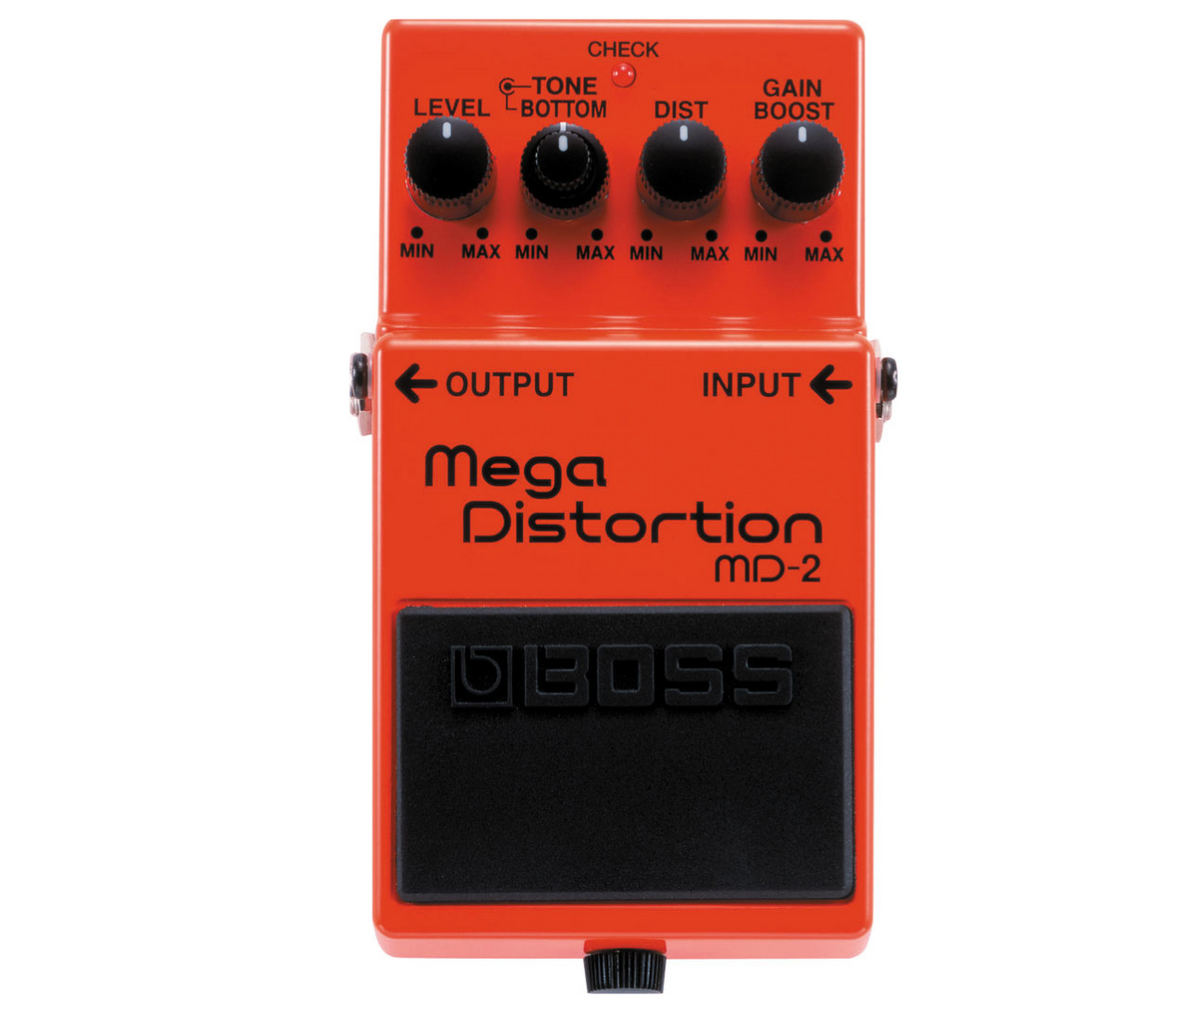 BOSS MD-2 Mega Distortion Best Guitar Effects Pedal for Extreme, Low-end Distortion Modern Metal and Hard Rock